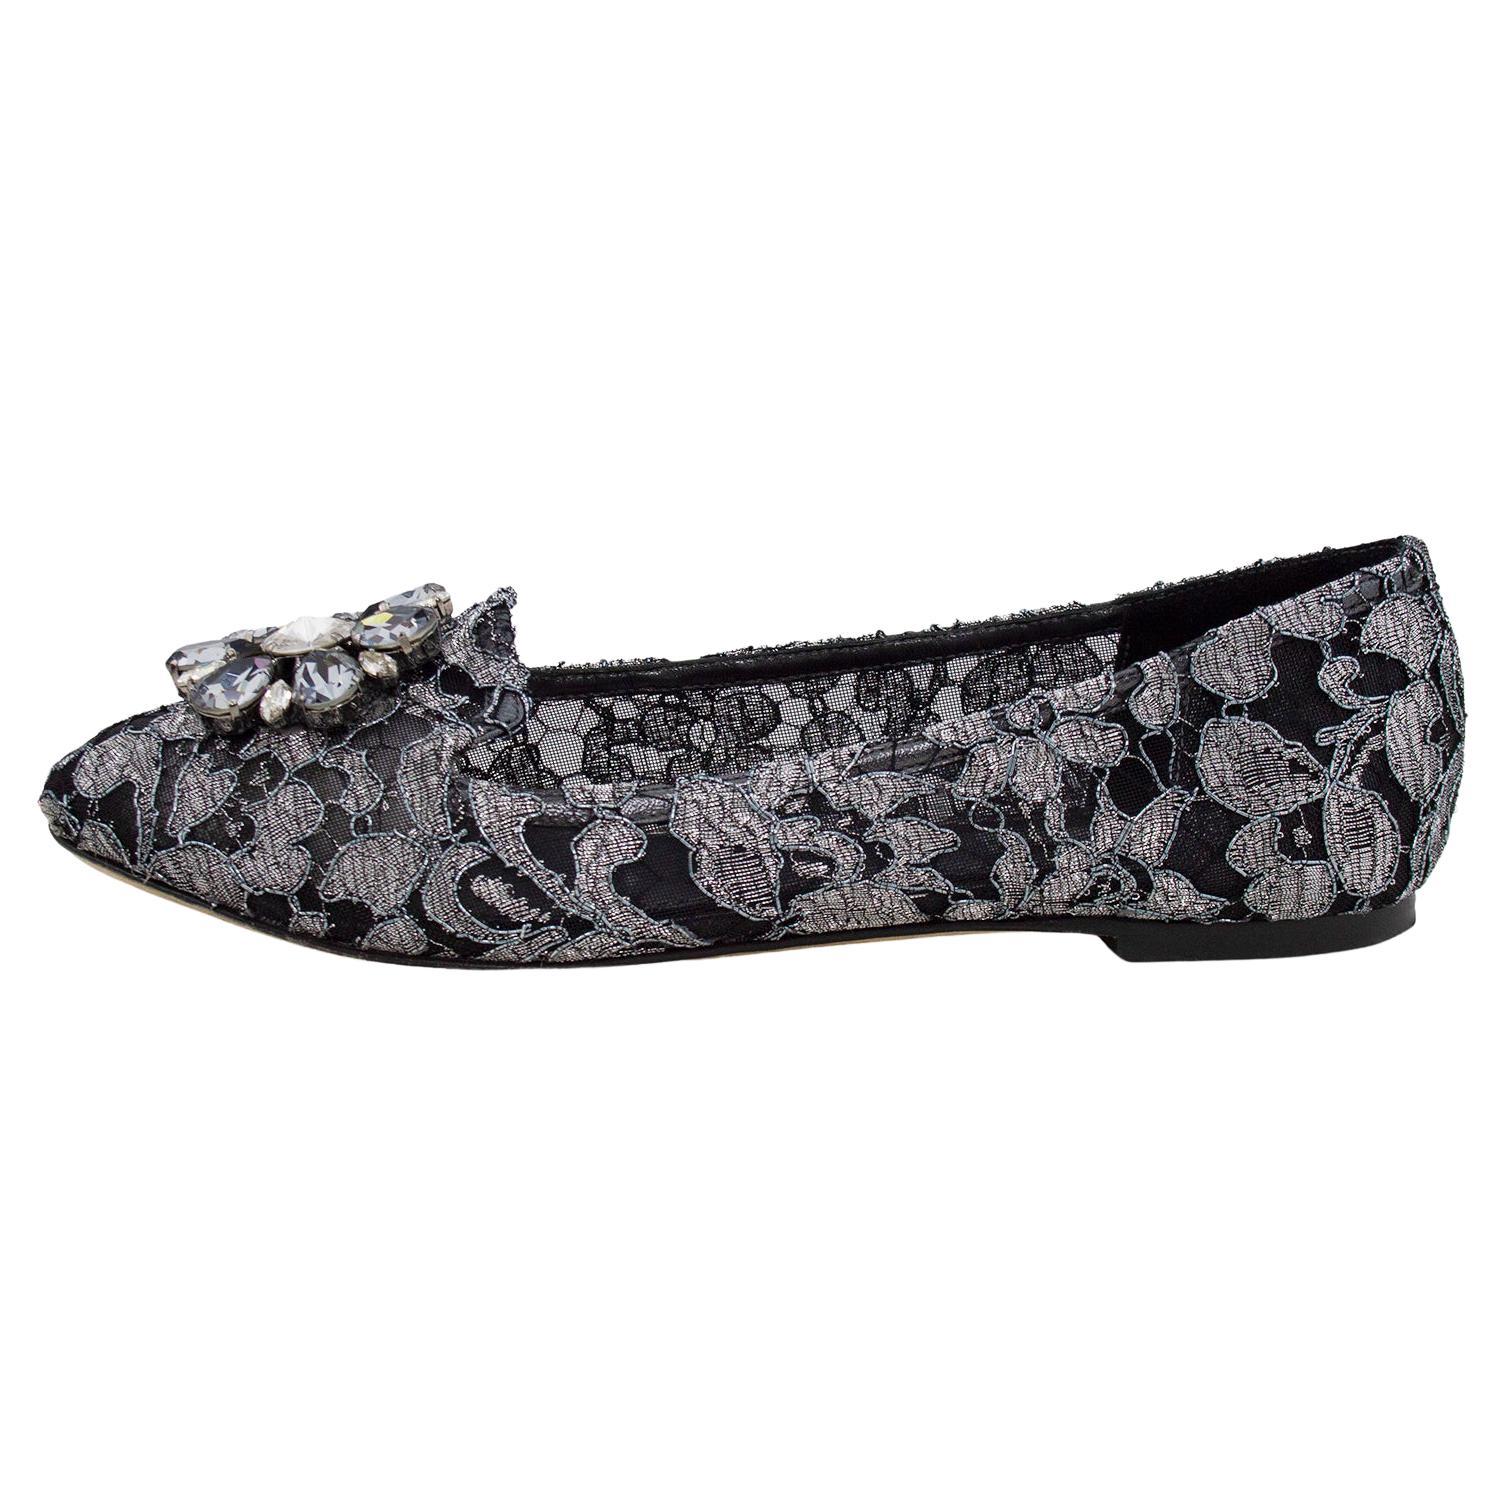 Dolce and Gabbana house-signature black and silver Taormina lace Vally ballerina flats. Slipper shape with round toe featuring a flower shaped crystal embellished appliqué. Fabric lining with leather sole and insole. Handmade in Italy. Excellent